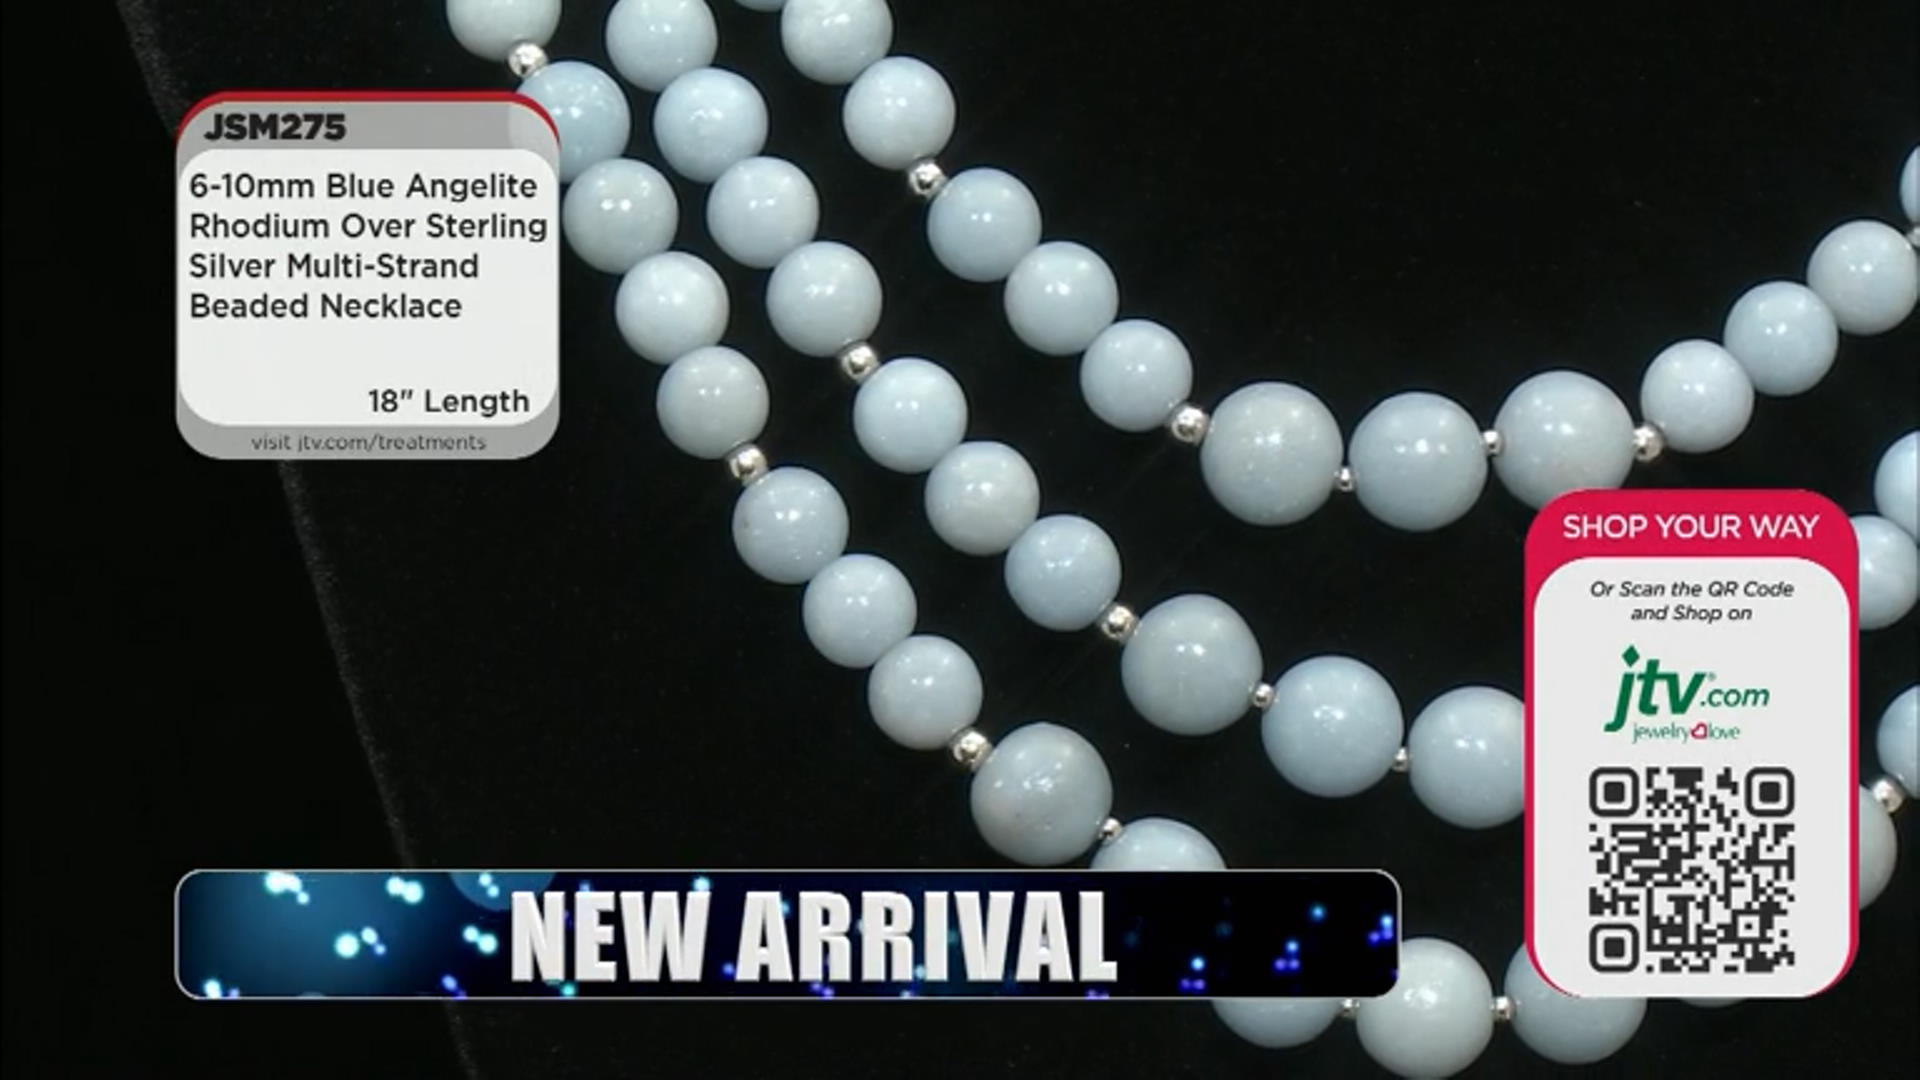 Blue Angelite Rhodium Over Sterling Silver Multi-Strand Beaded Necklace Video Thumbnail